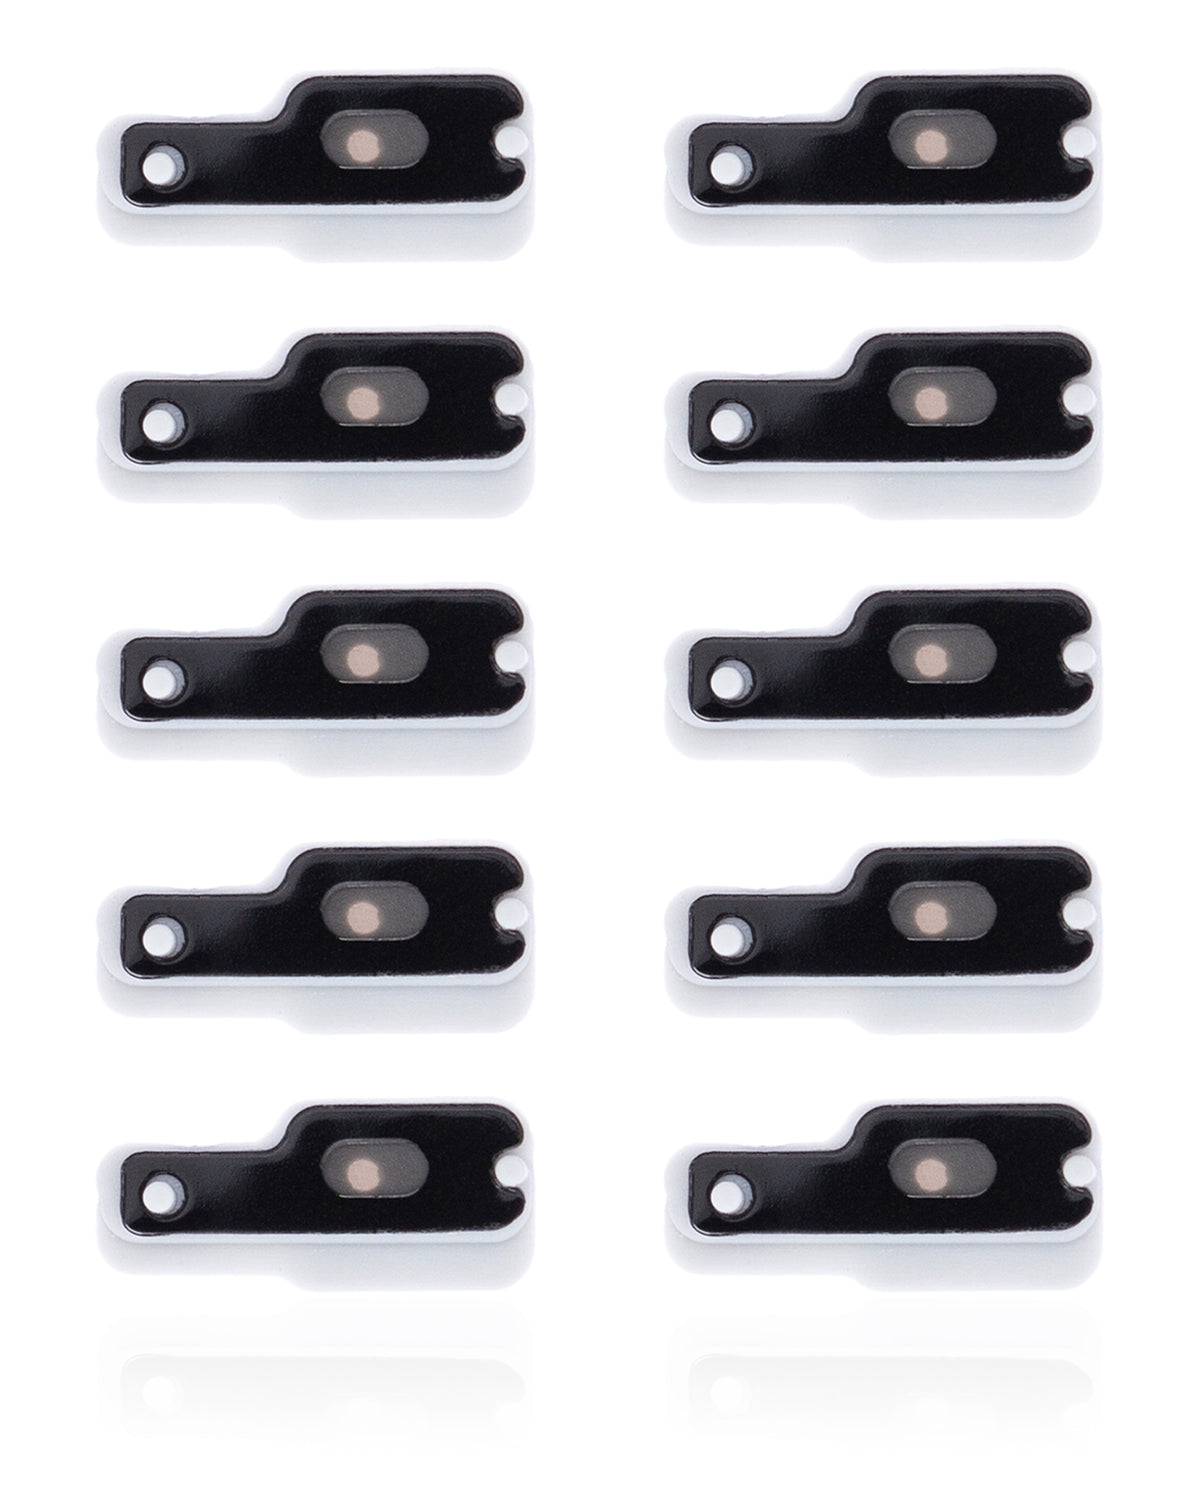 FLASH LIGHT / POWER FLEX BRACKET WITH MICROPHONE MESH FOR IPHONE 12 PRO MAX (10 PACK)